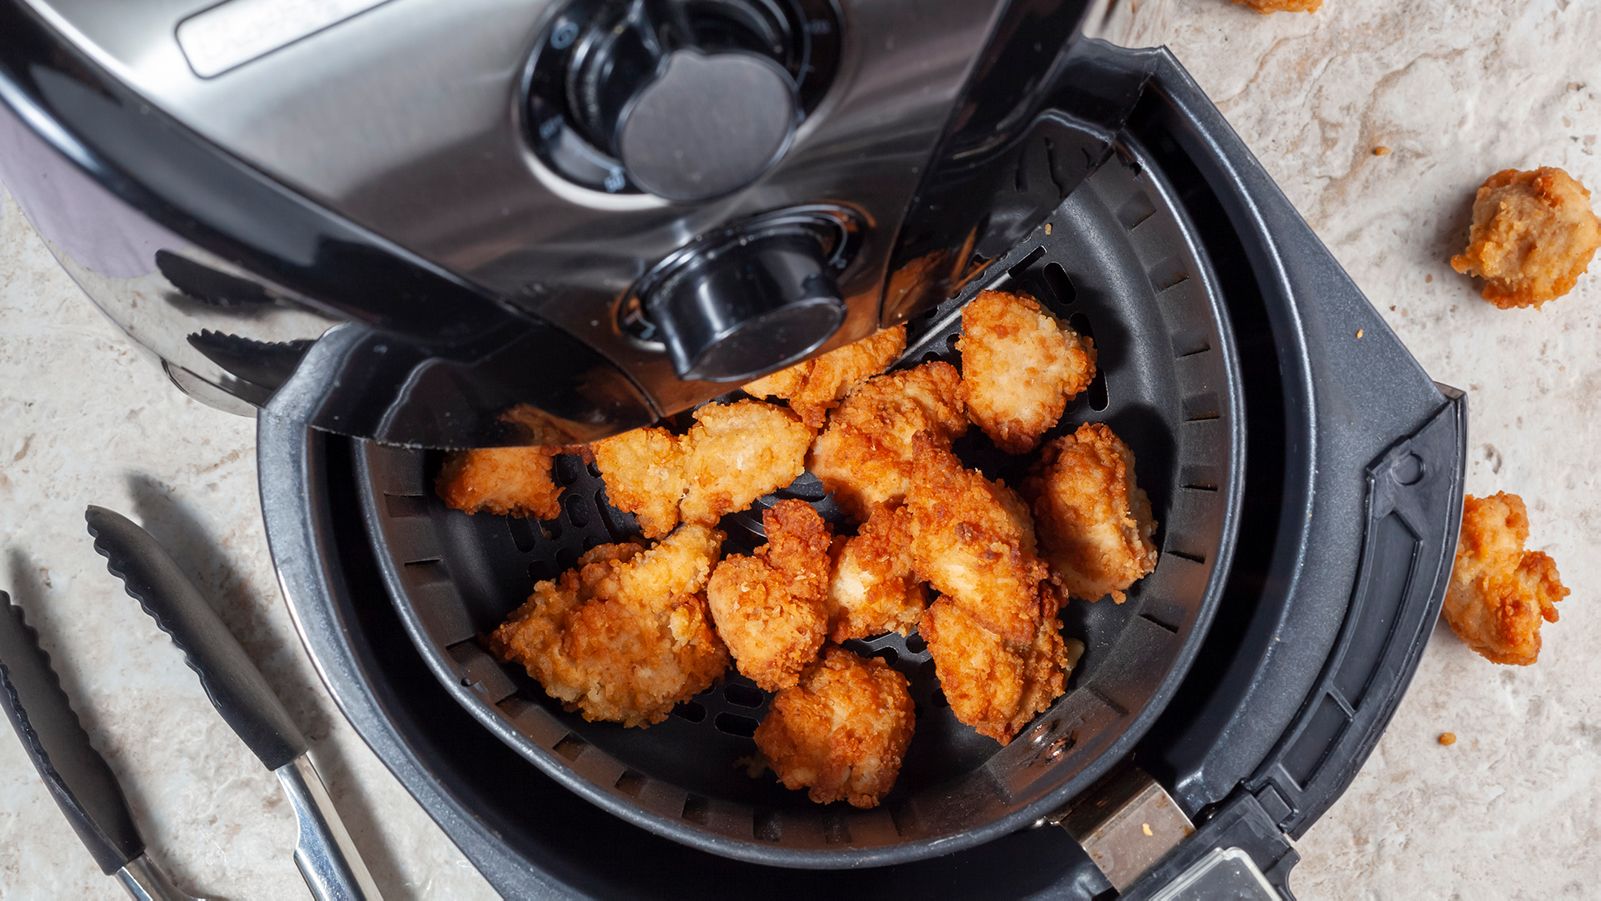 Ninja Foodi Dual Basket Air Fryer - just purchased because it was on sale  for $119 and I have been wanting an air fryer for a long time. Bought some  Just Bare